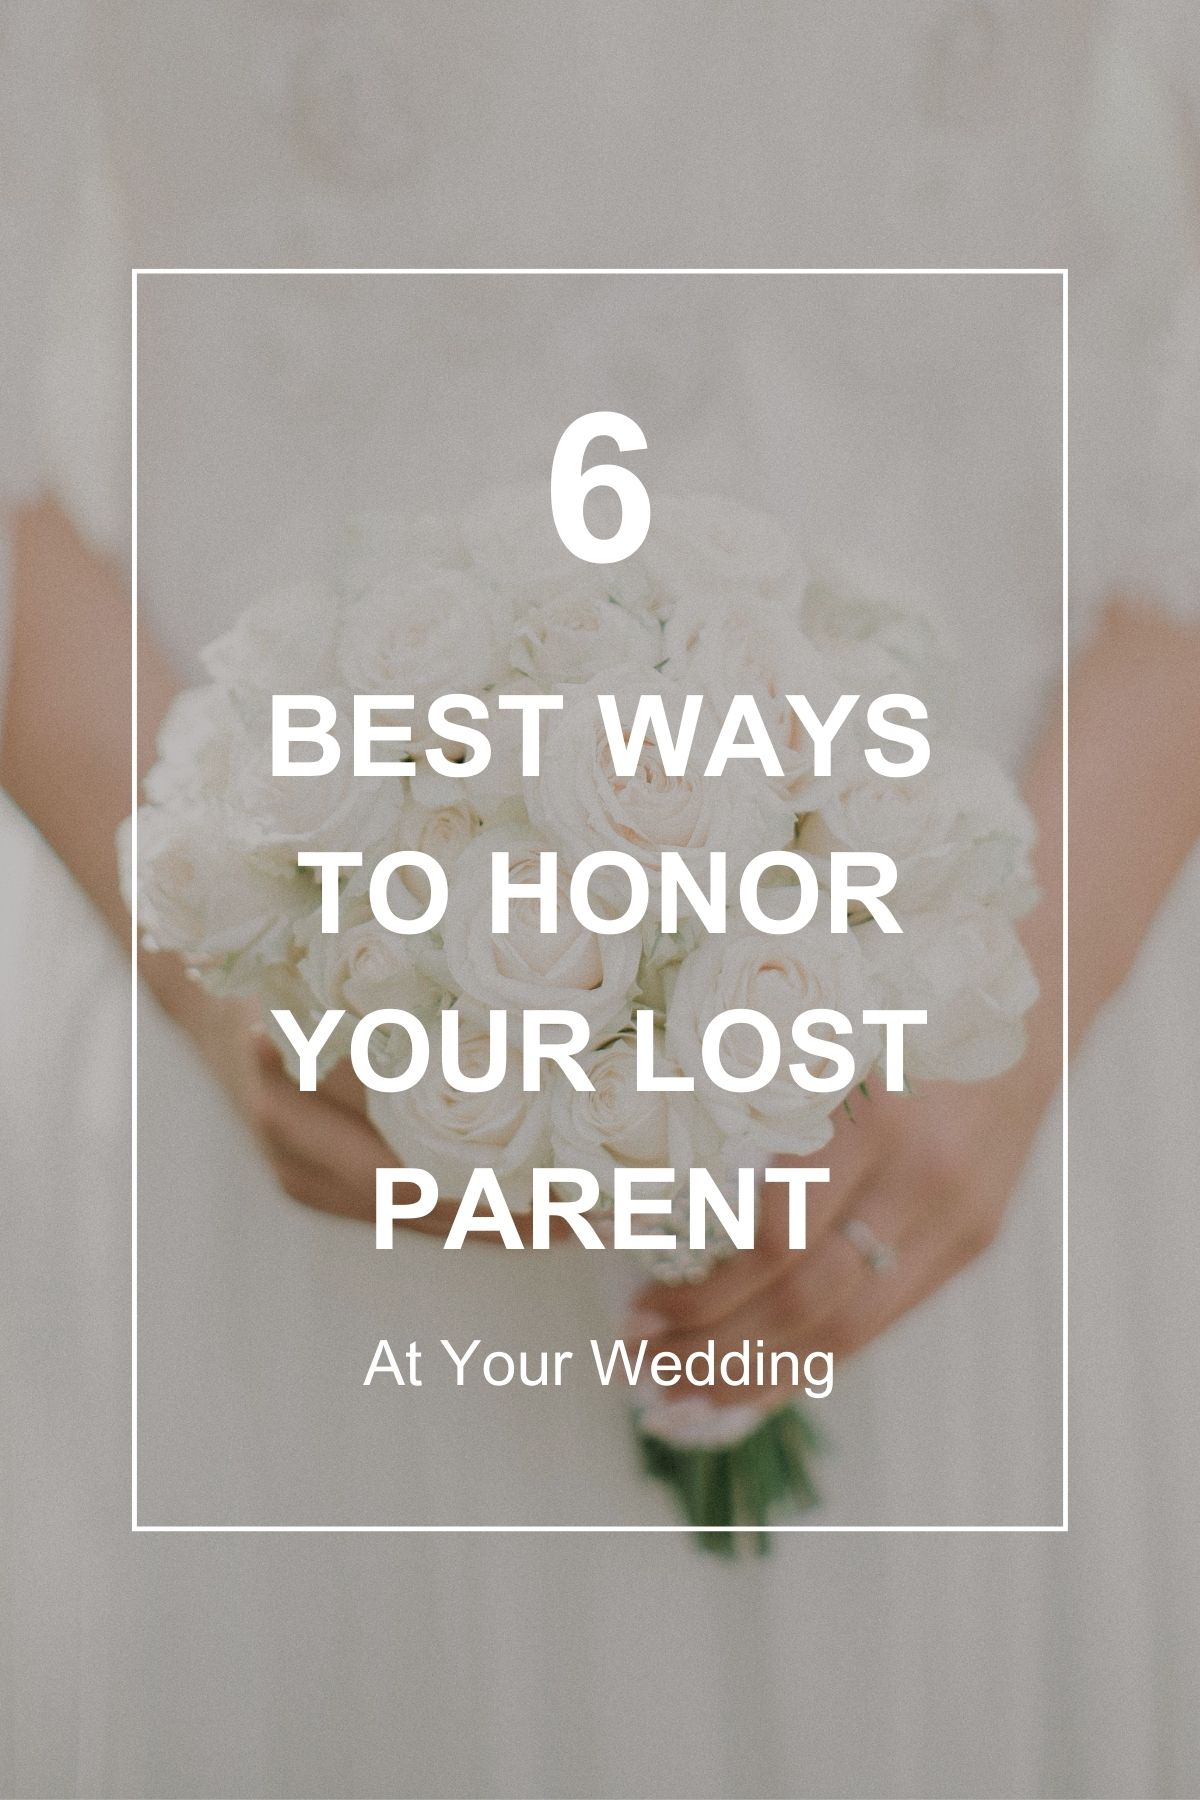 6 Best Ways to Honor Your Lost Parent at Your Wedding